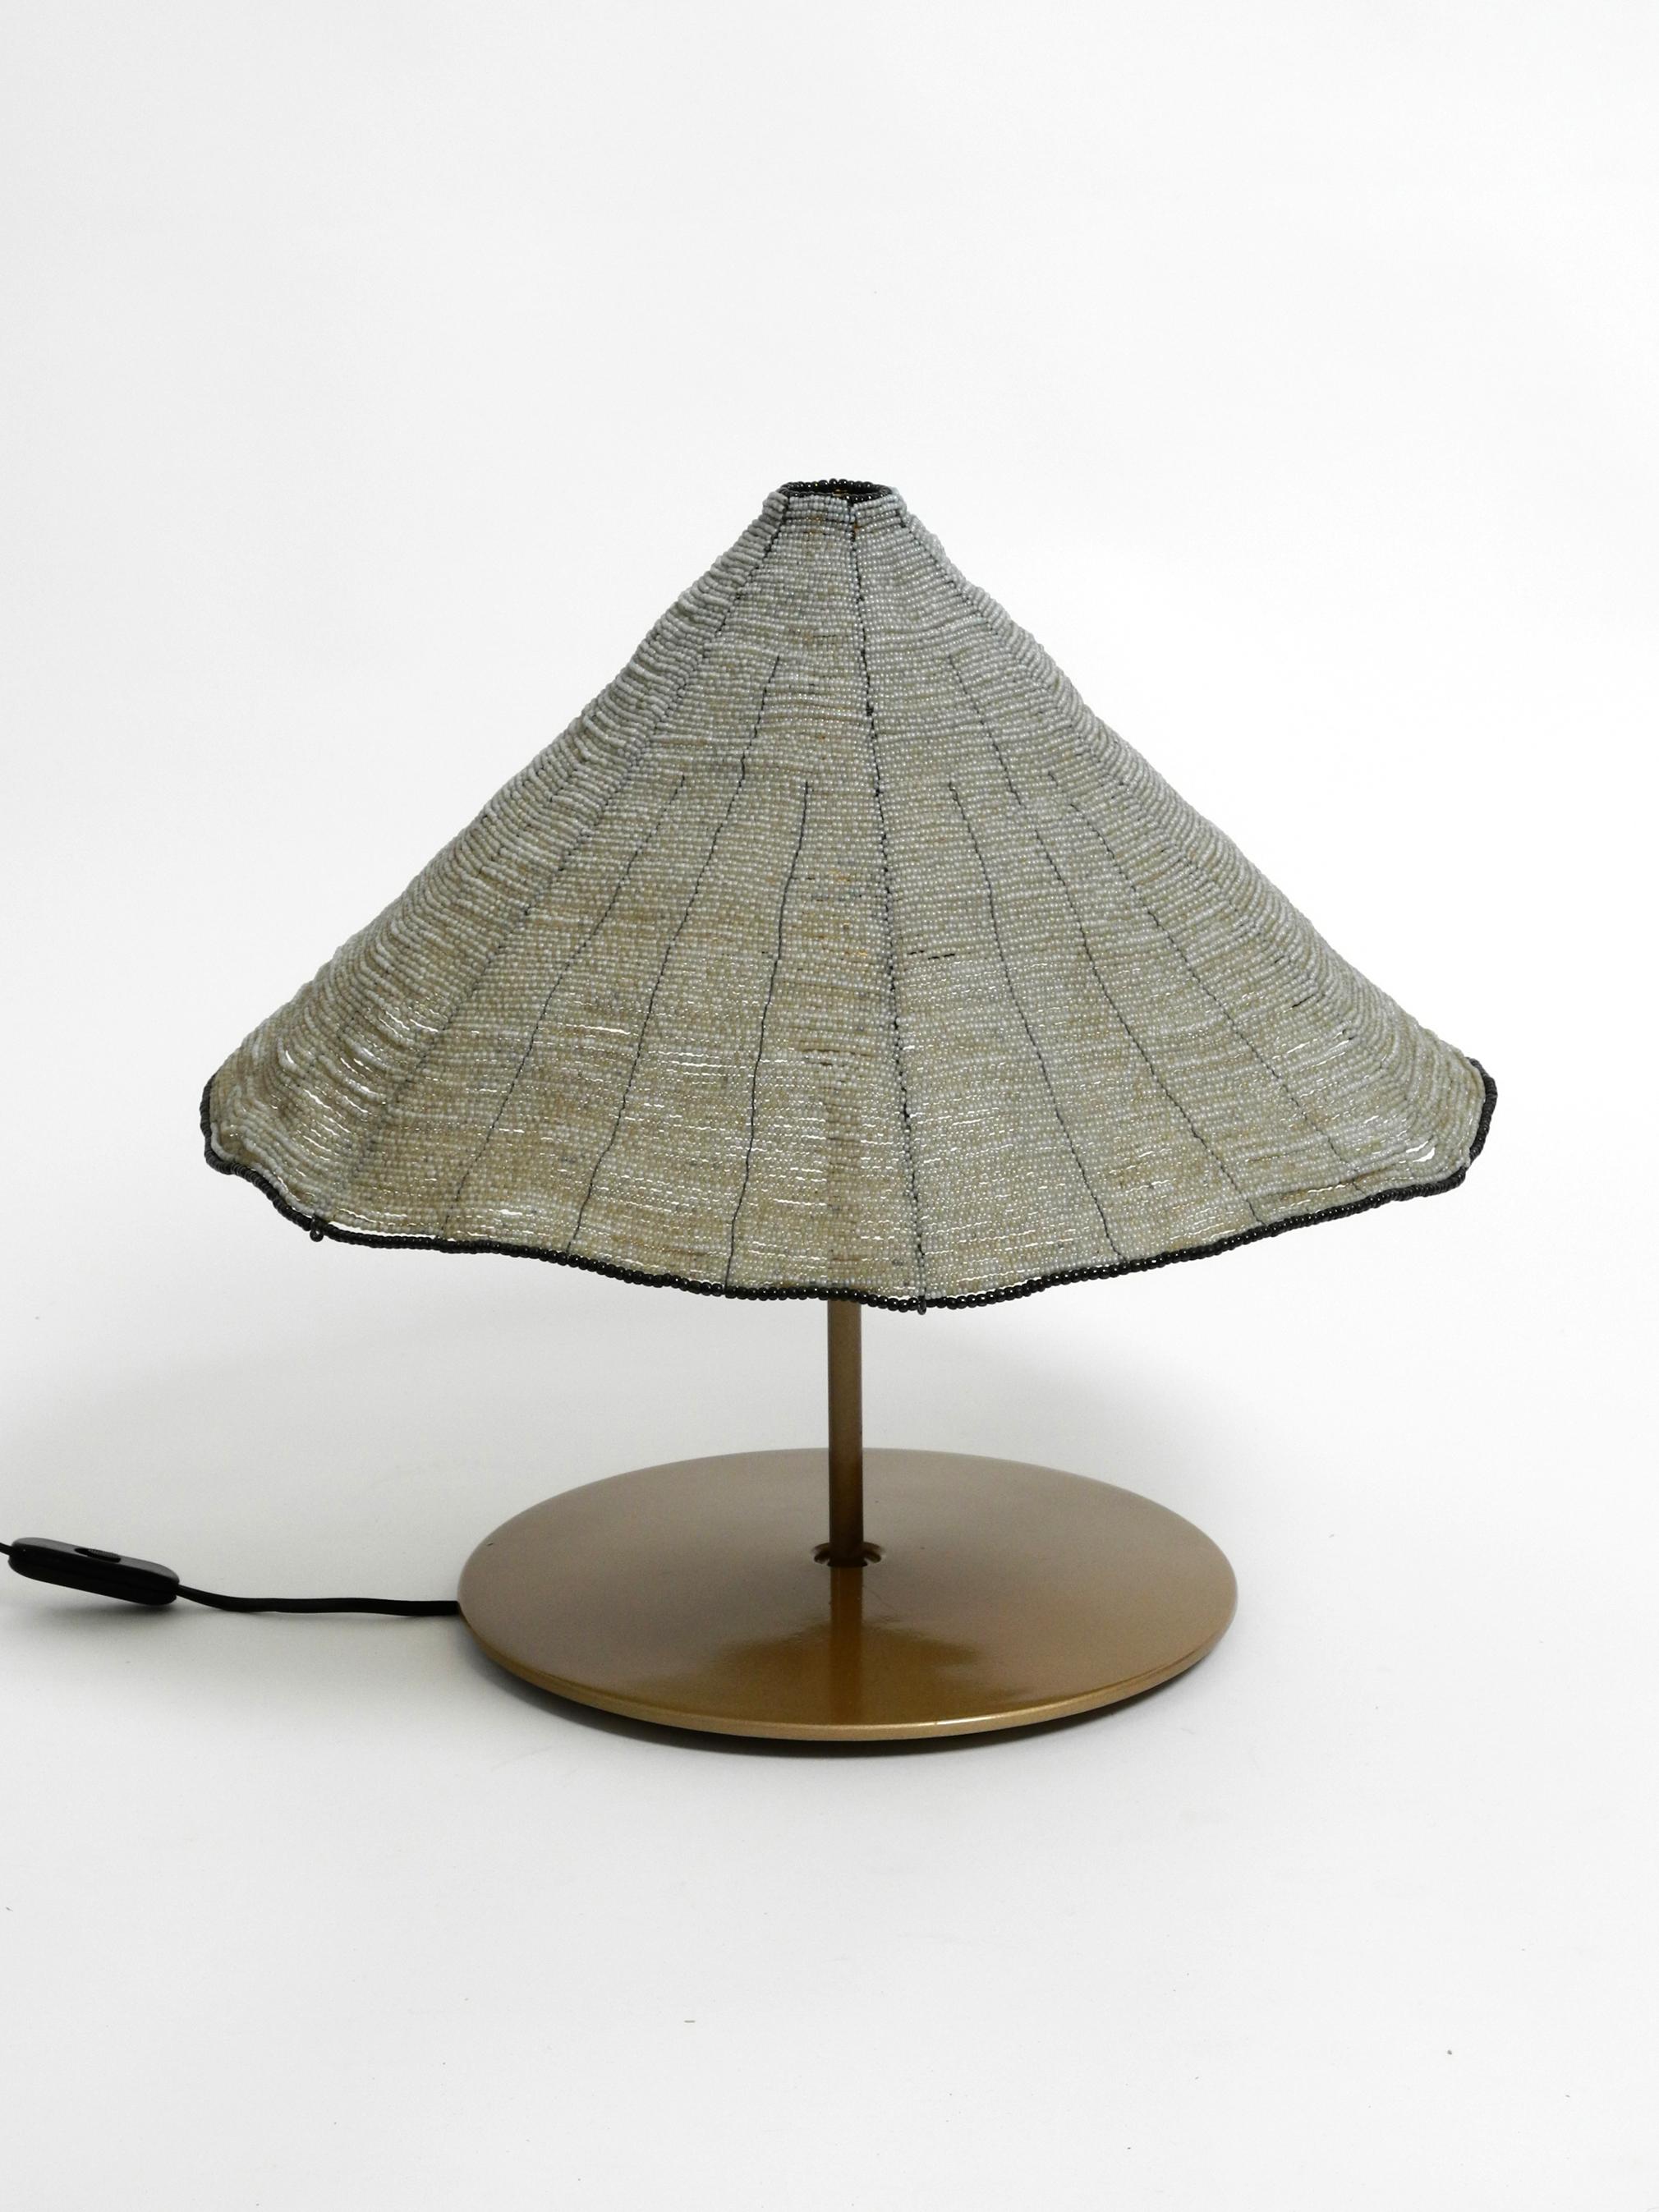 80s Sarasar Table Lamp with Glass Bead Shade by Toso and Pamio for Leucos Italy  7